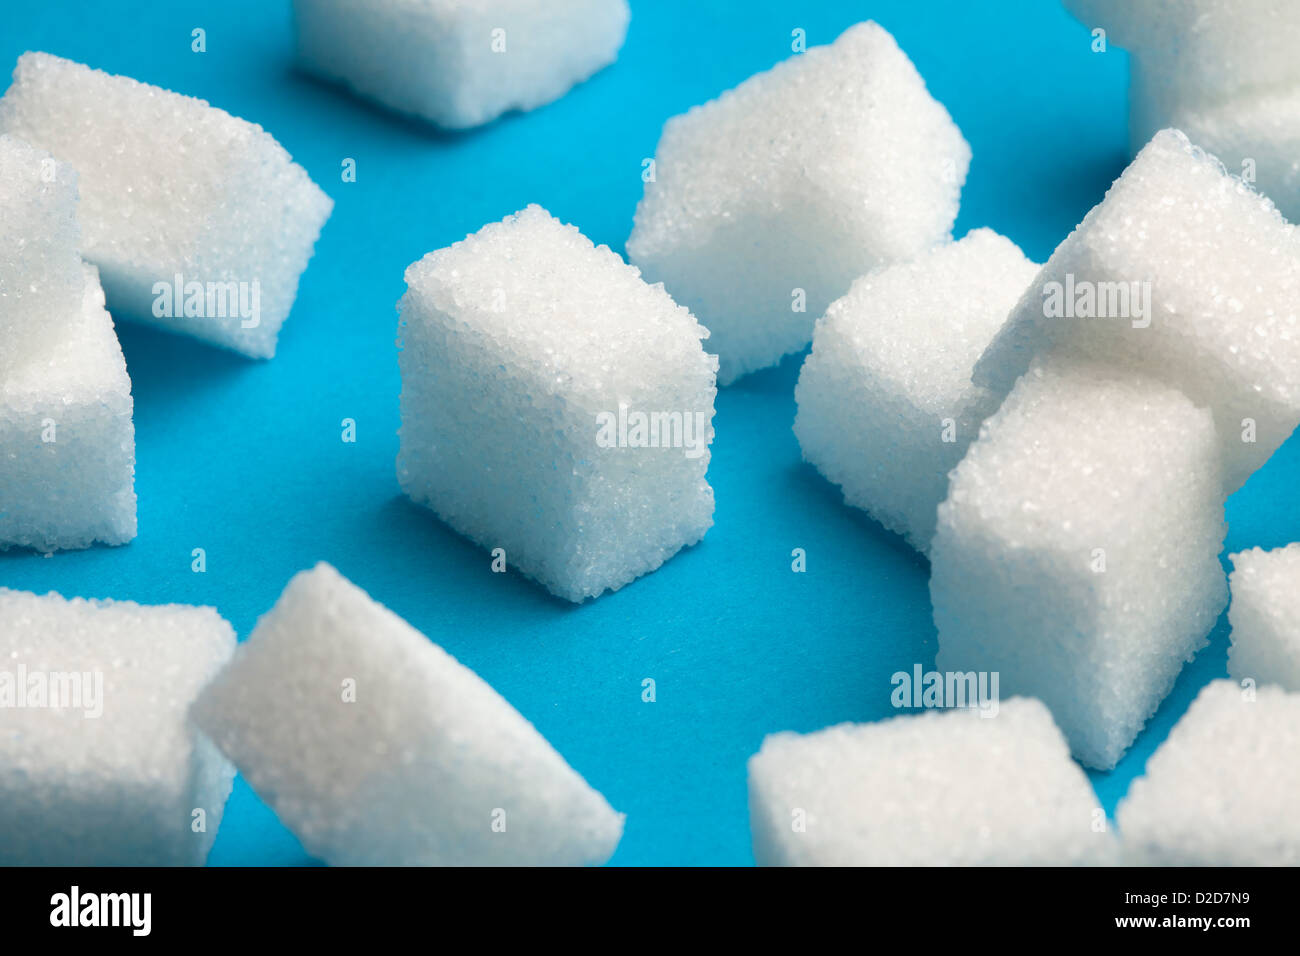 Sugar cubes with one standing out in the middle Stock Photo